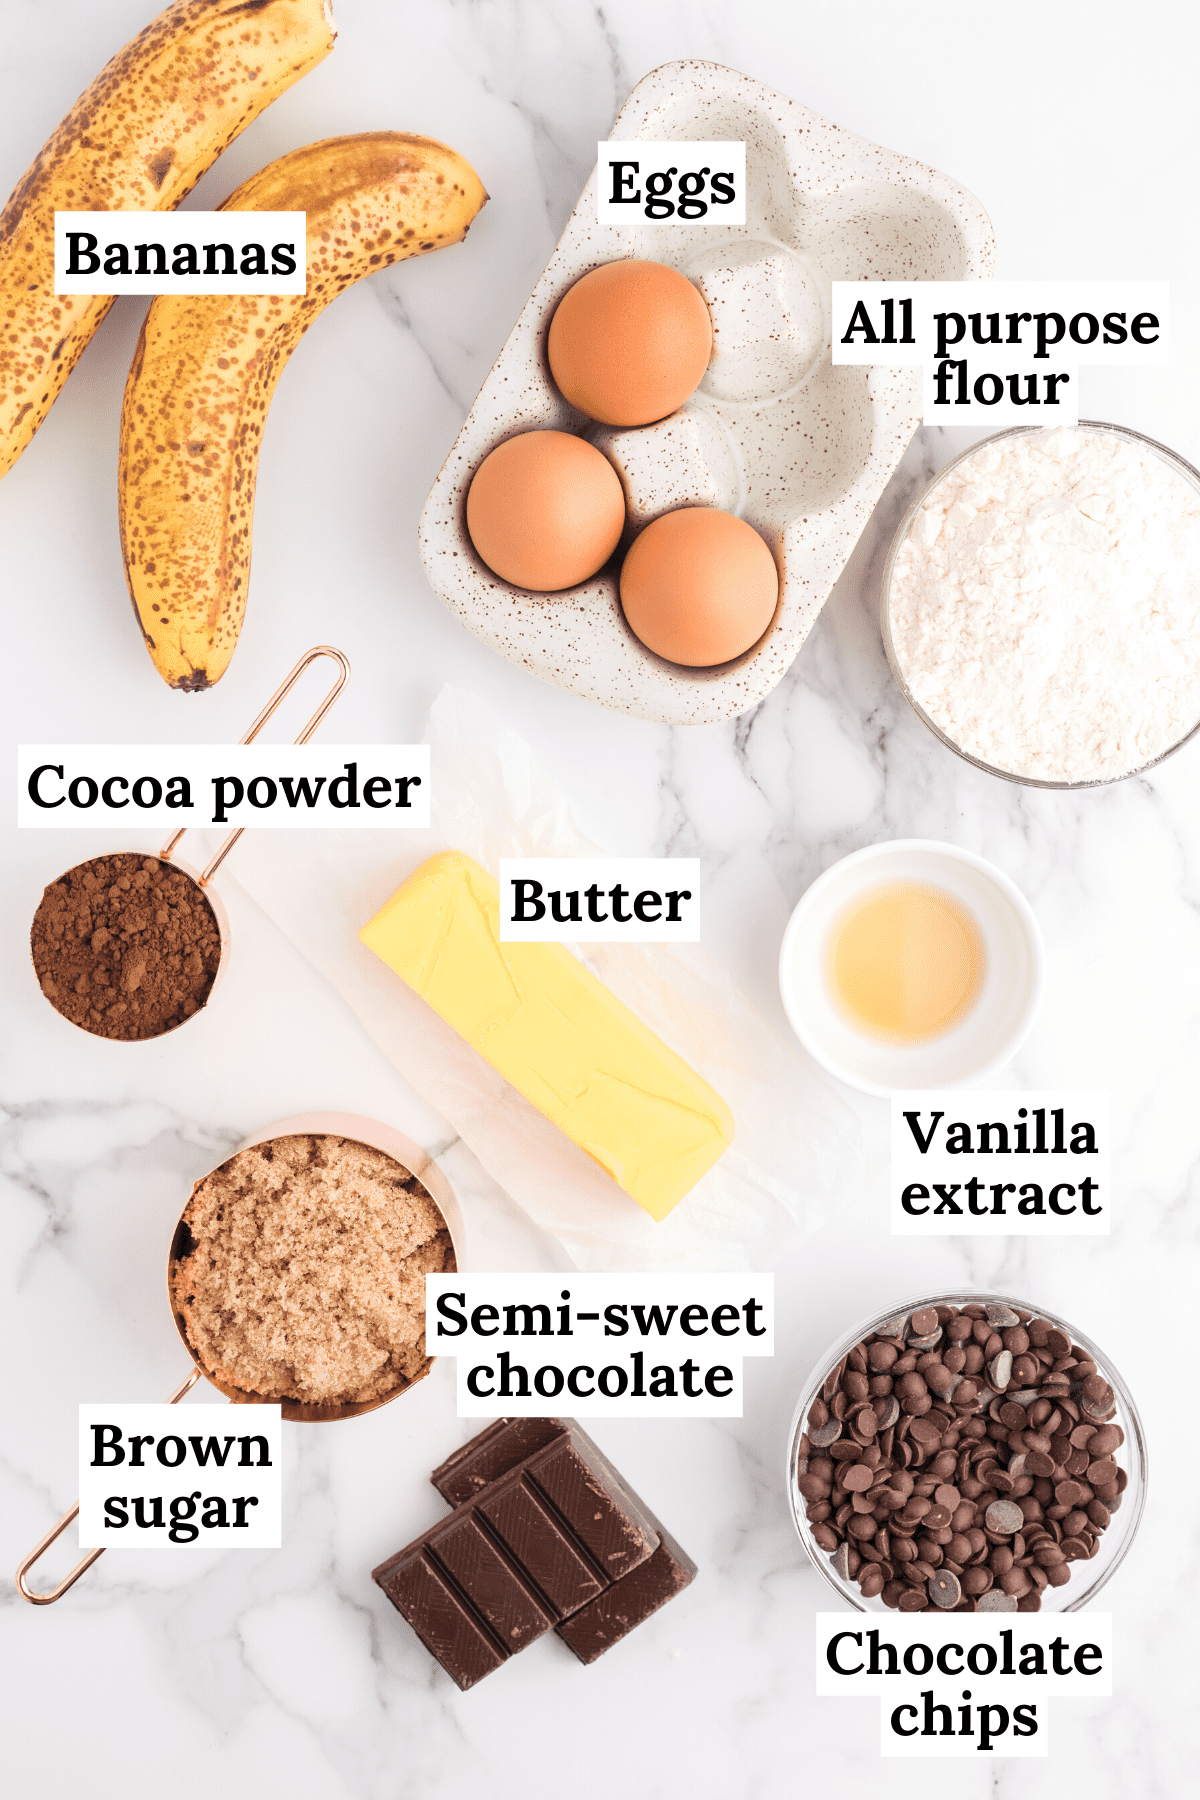 the ingredients for banana brownies including a bowl of chocolate chips, semi-sweet chocolate bars, brown sugar, vanilla extract, butter, bananas, eggs, all purpose flour and cocoa powder